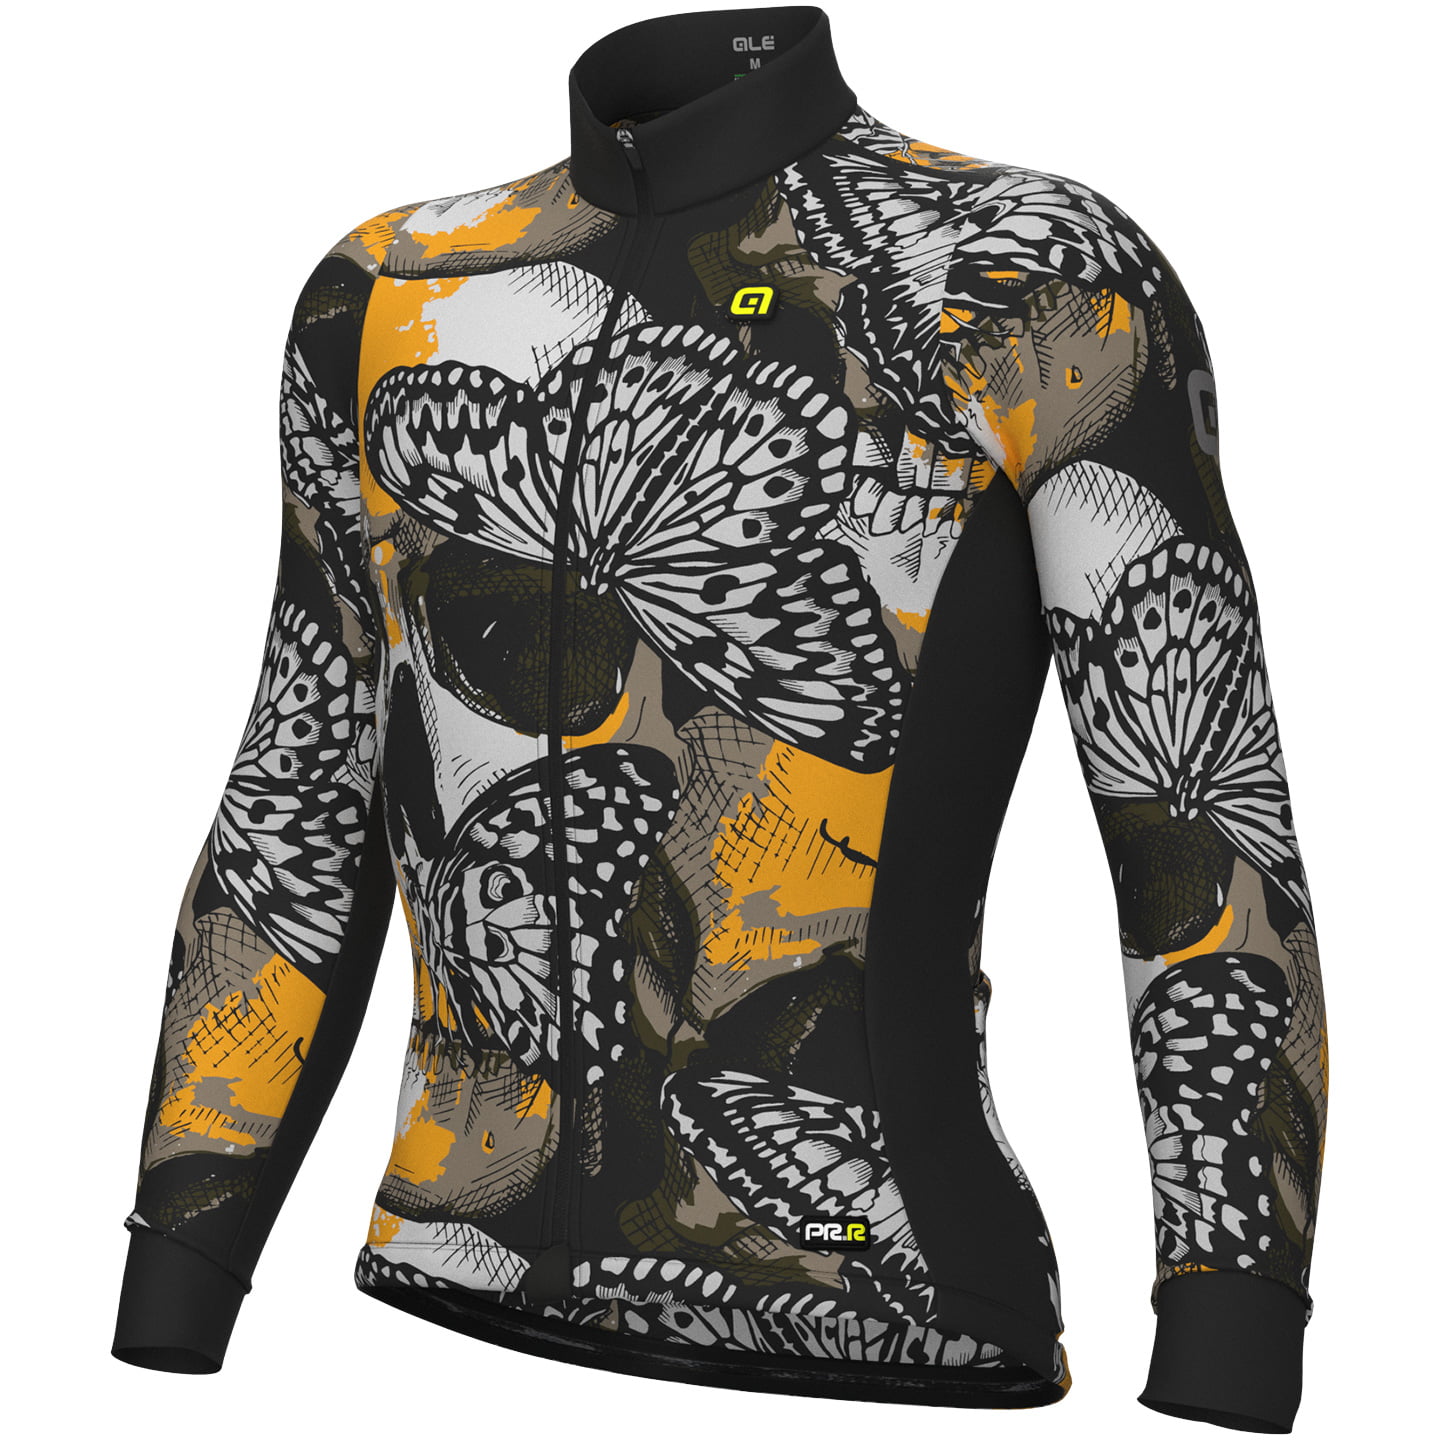 ALE Falena Long Sleeve Jersey Long Sleeve Jersey, for men, size XL, Cycling jersey, Cycle clothing